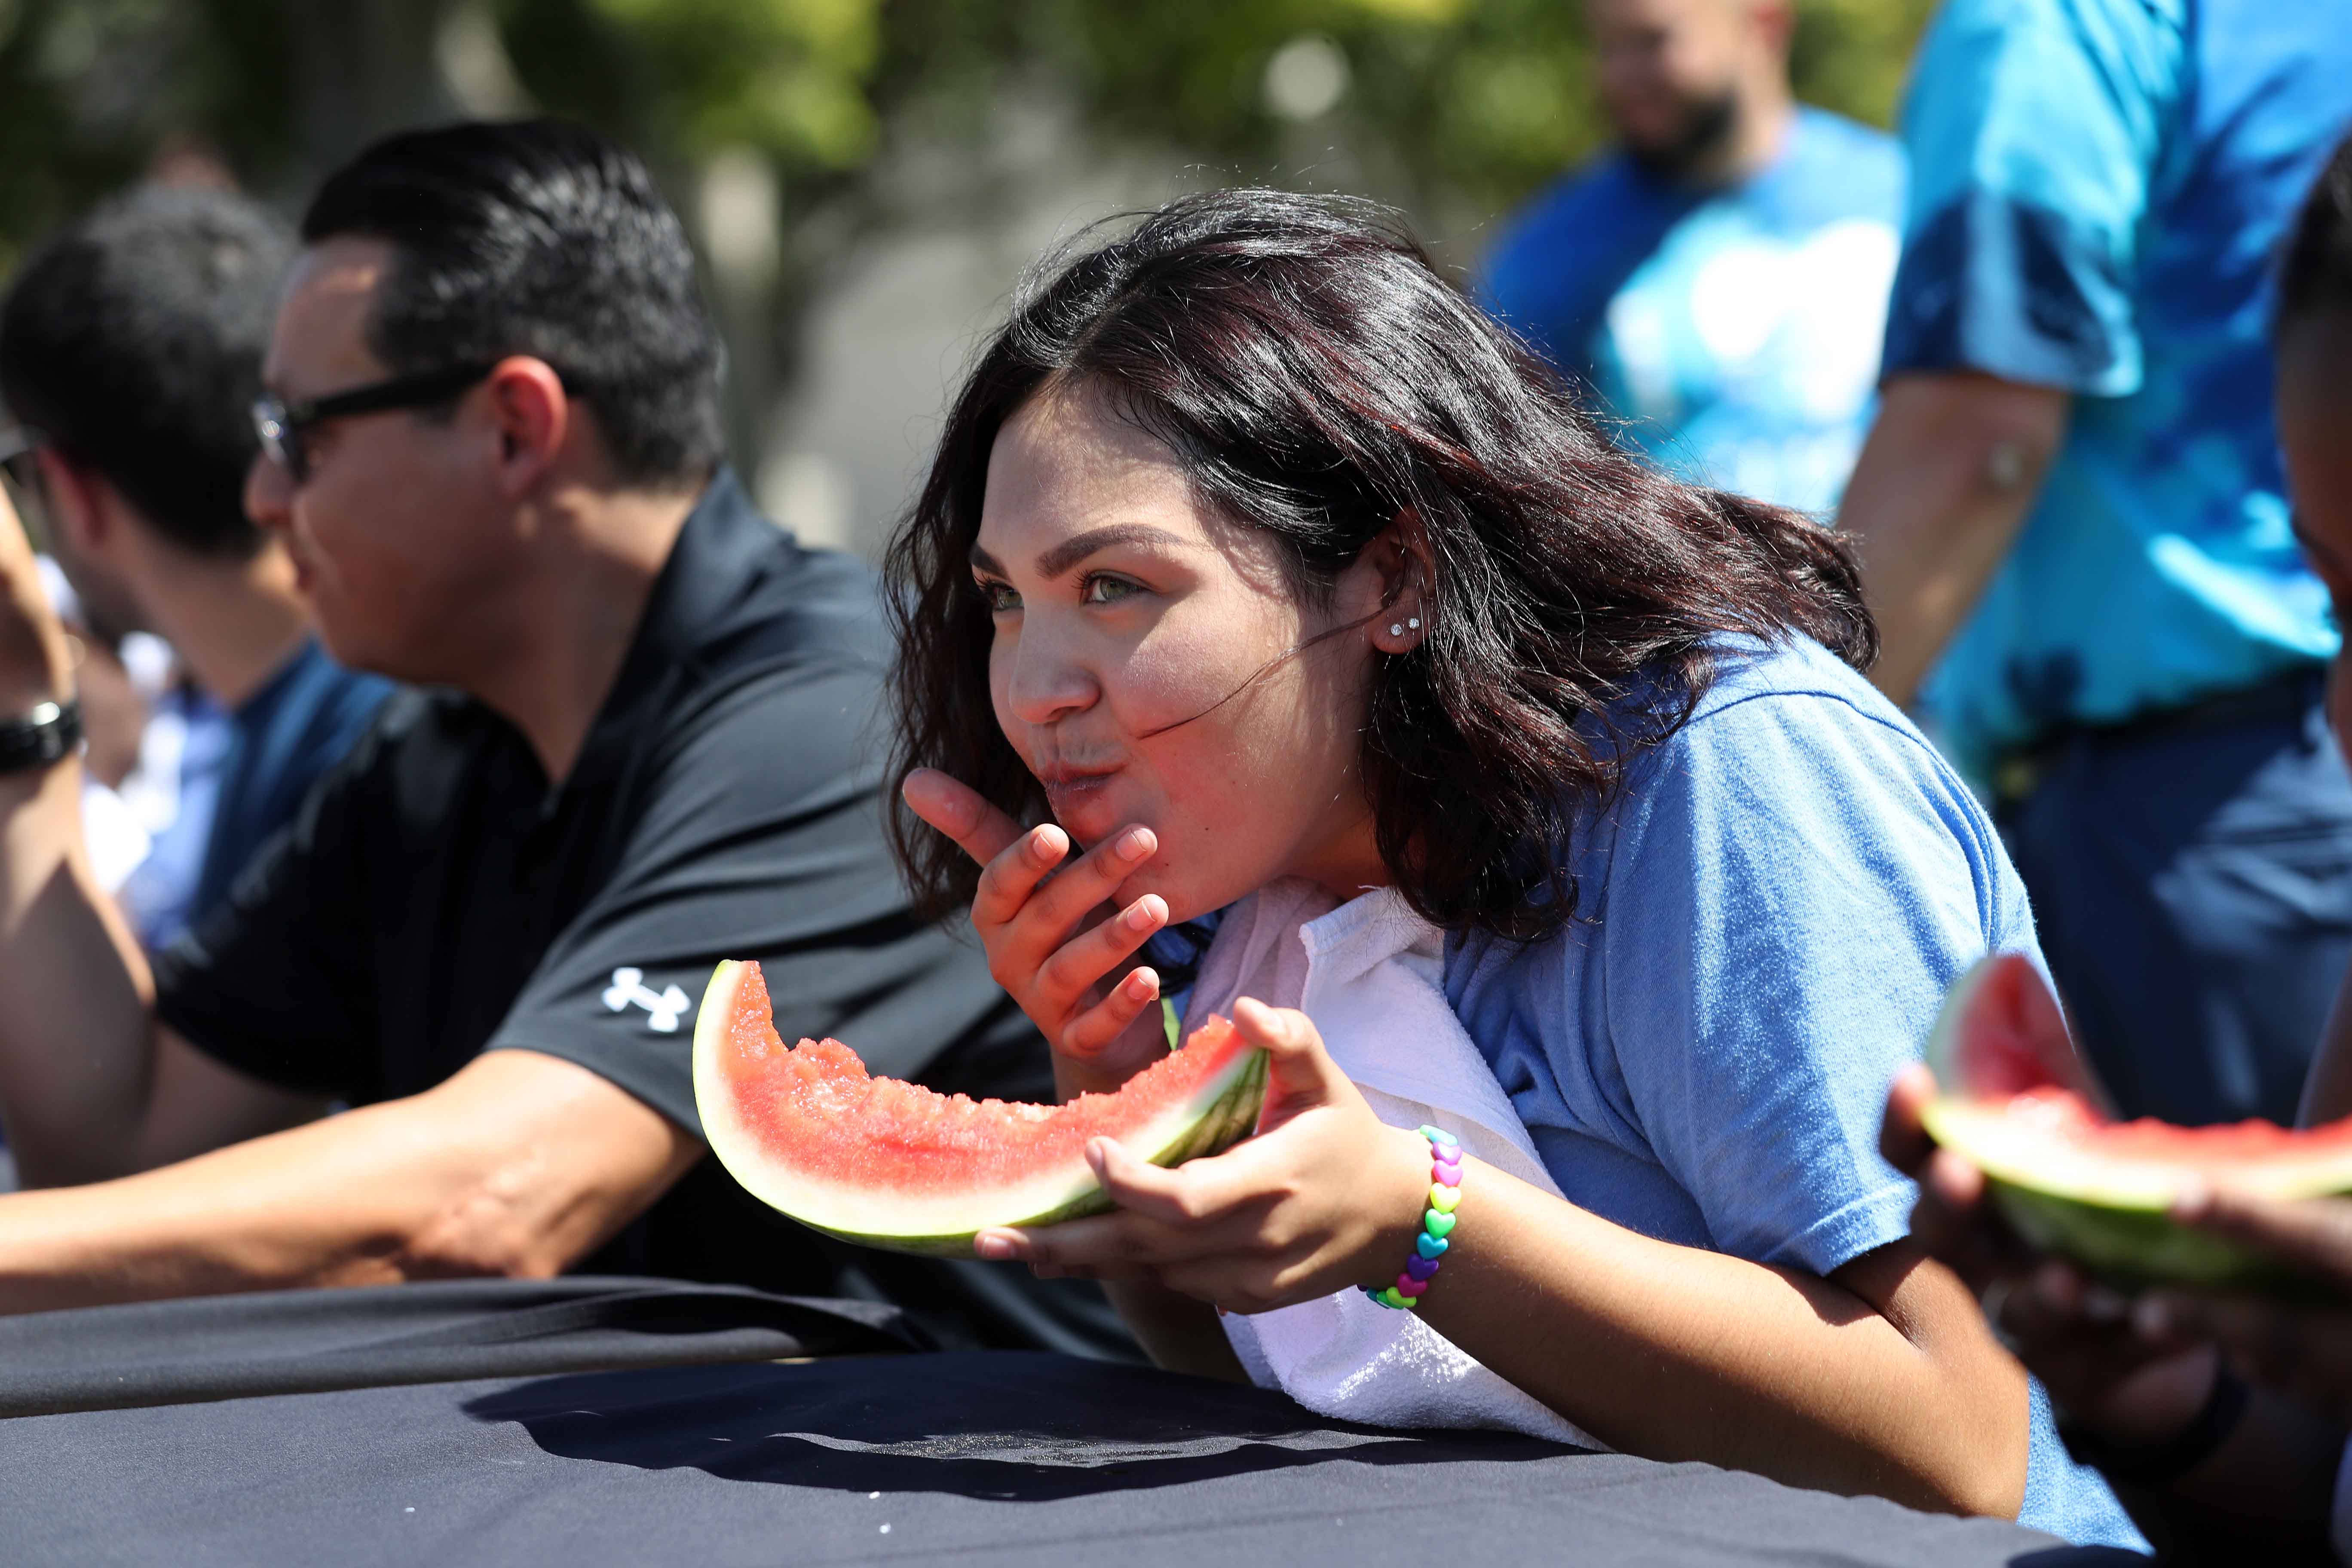 The fourth annual Employee Appreciation Picnic took place on the John M. Pfau Library lawn on Sept. 13